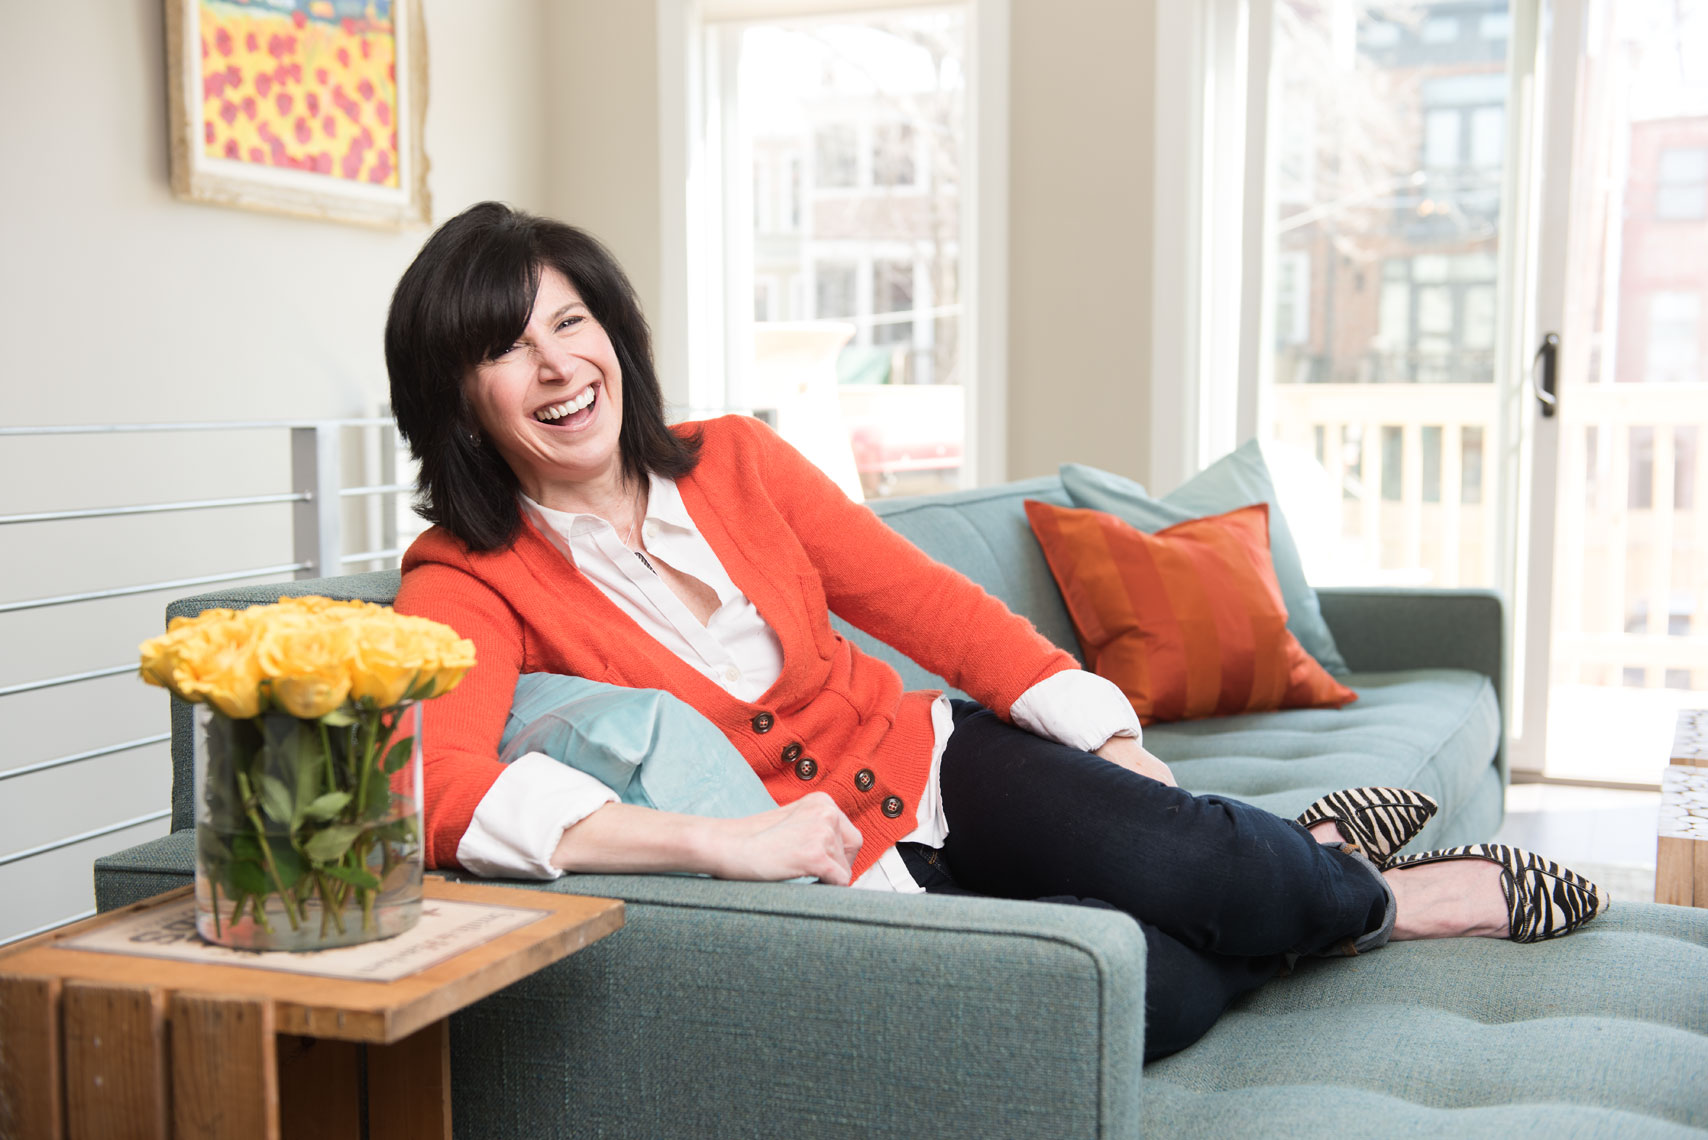 Woman in an orange sweater laughing on a couch